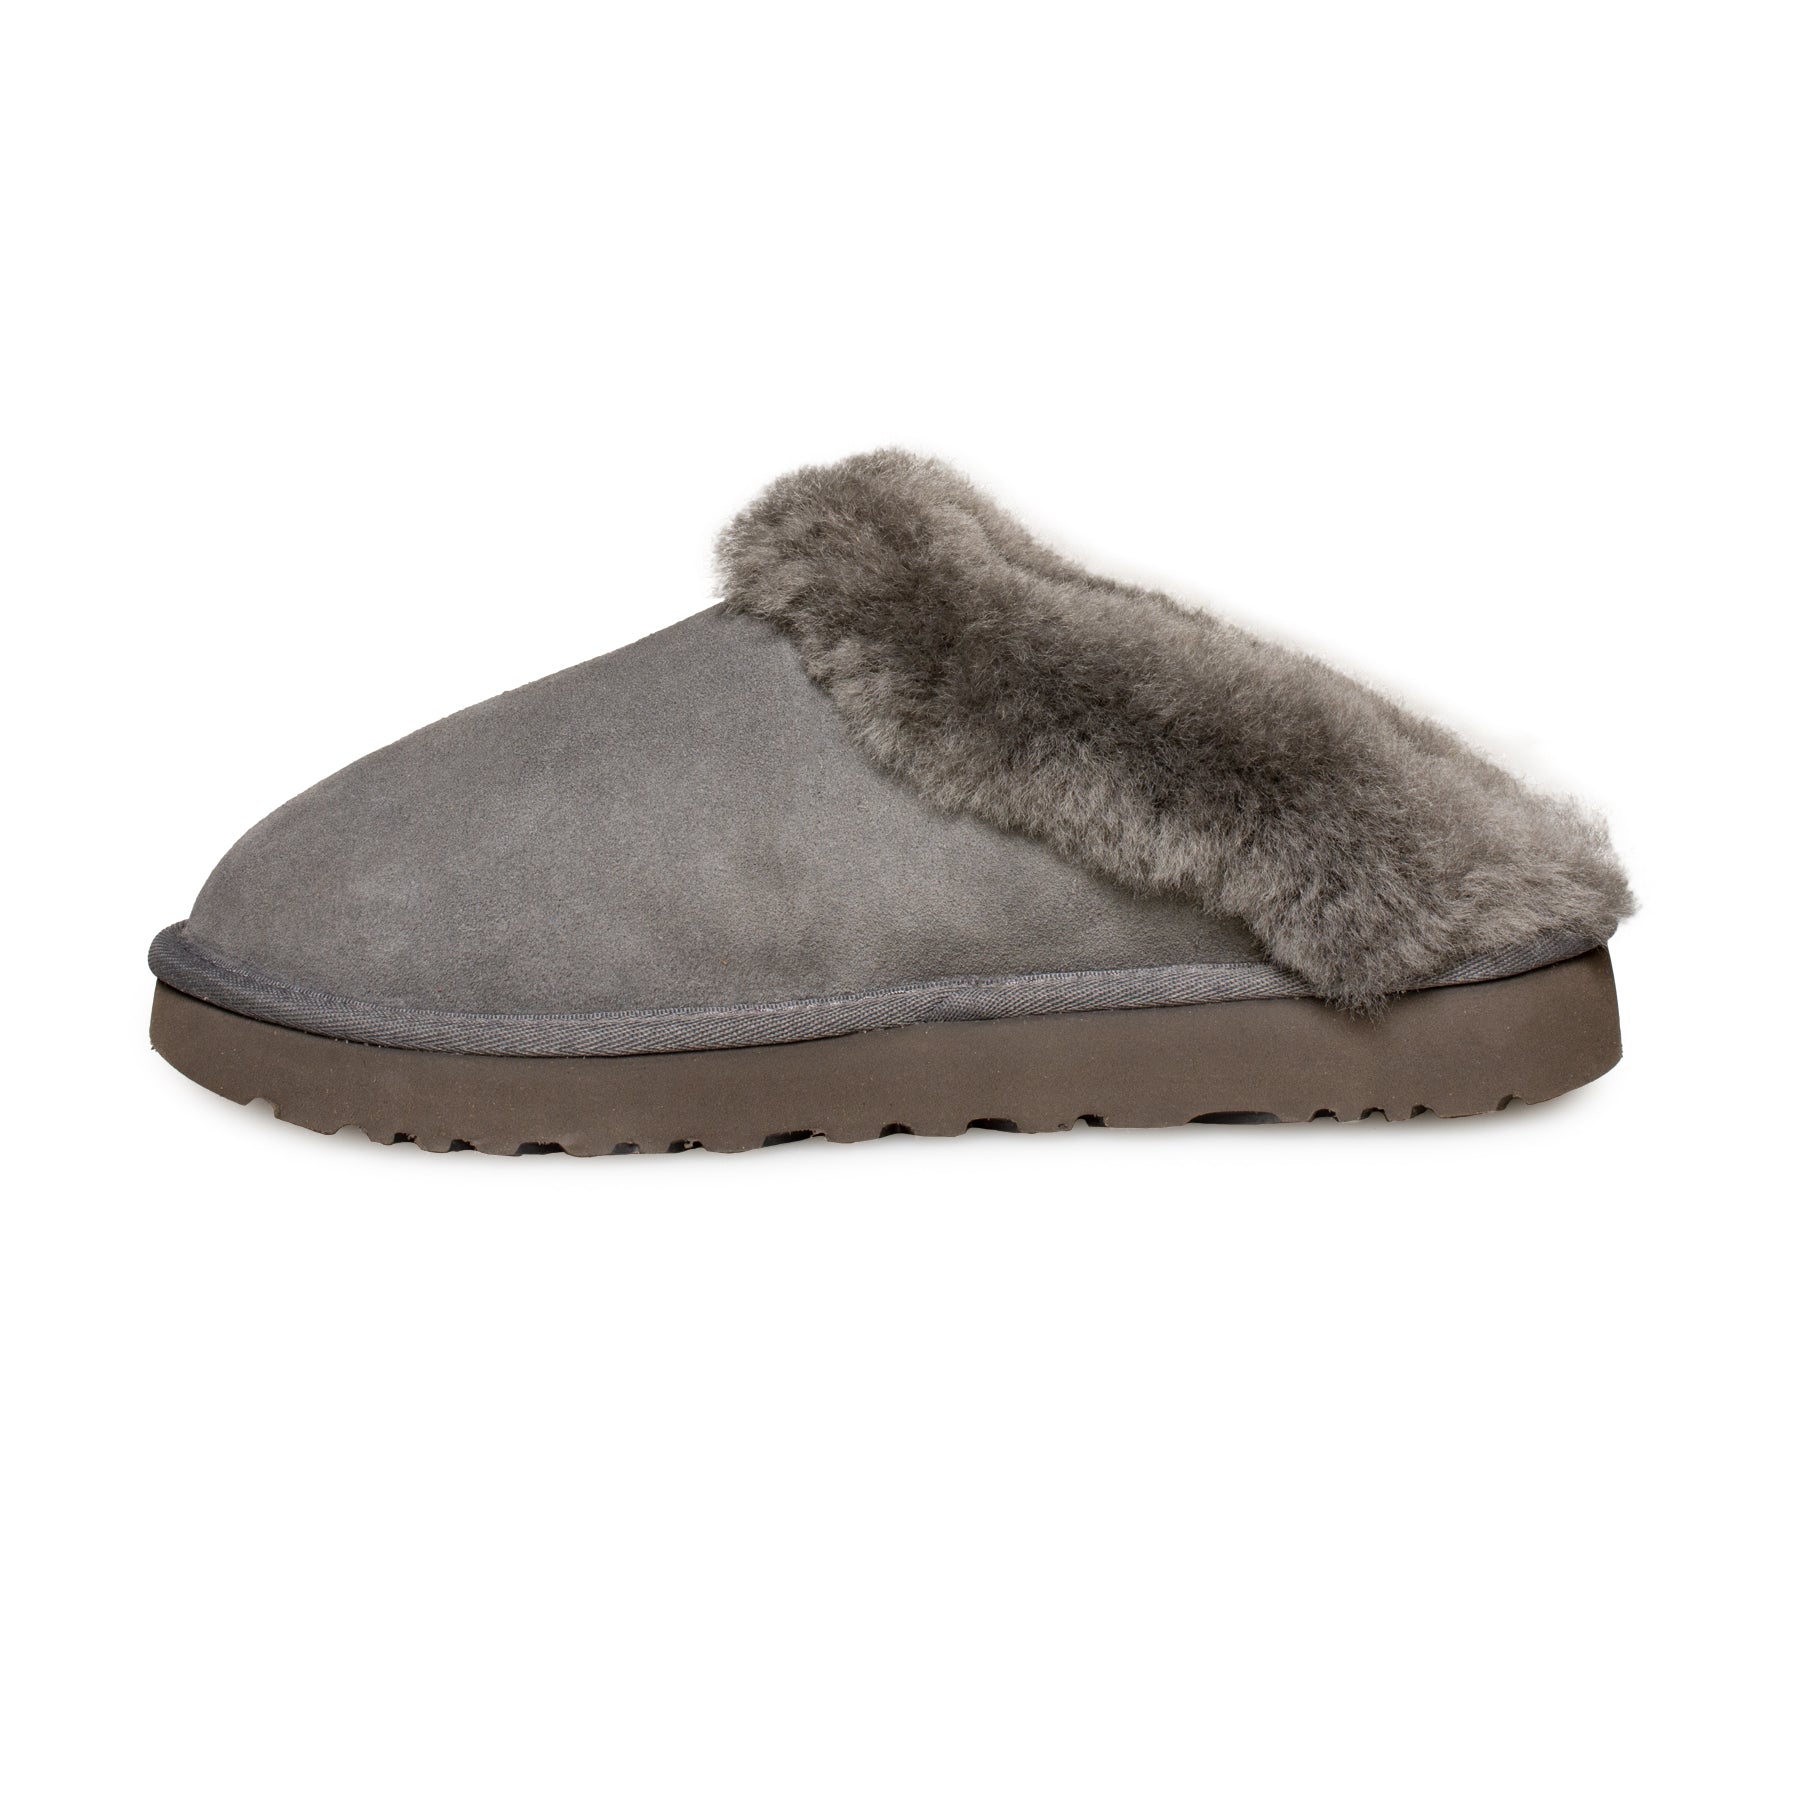 UGG Cluggette Charcoal Slippers - Women's – MyCozyBoots